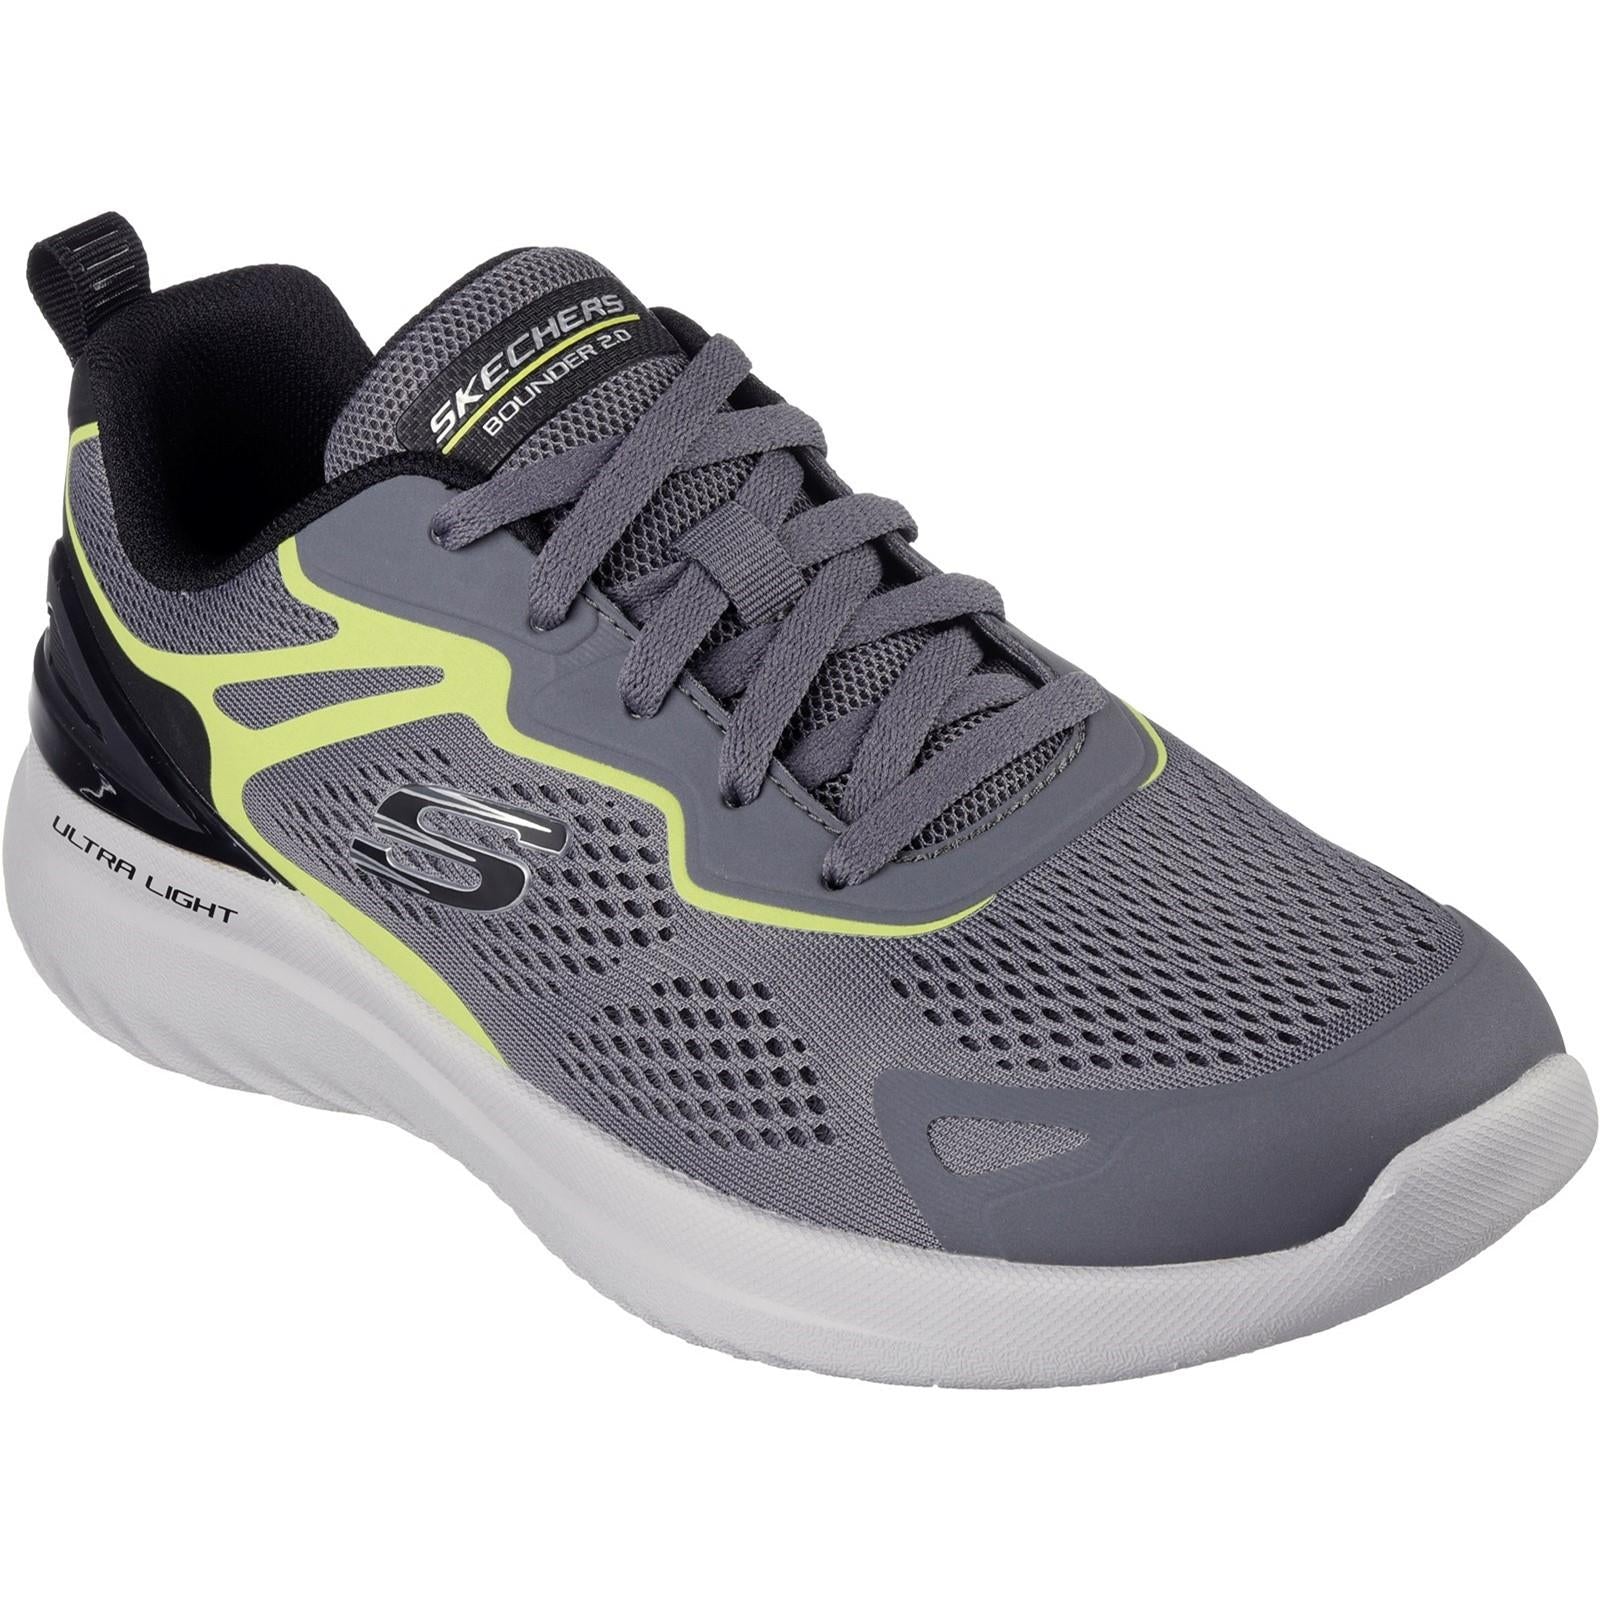 Skechers Bounder 2.0 Andal charcoal/lime memory foam sports gym trainers shoes